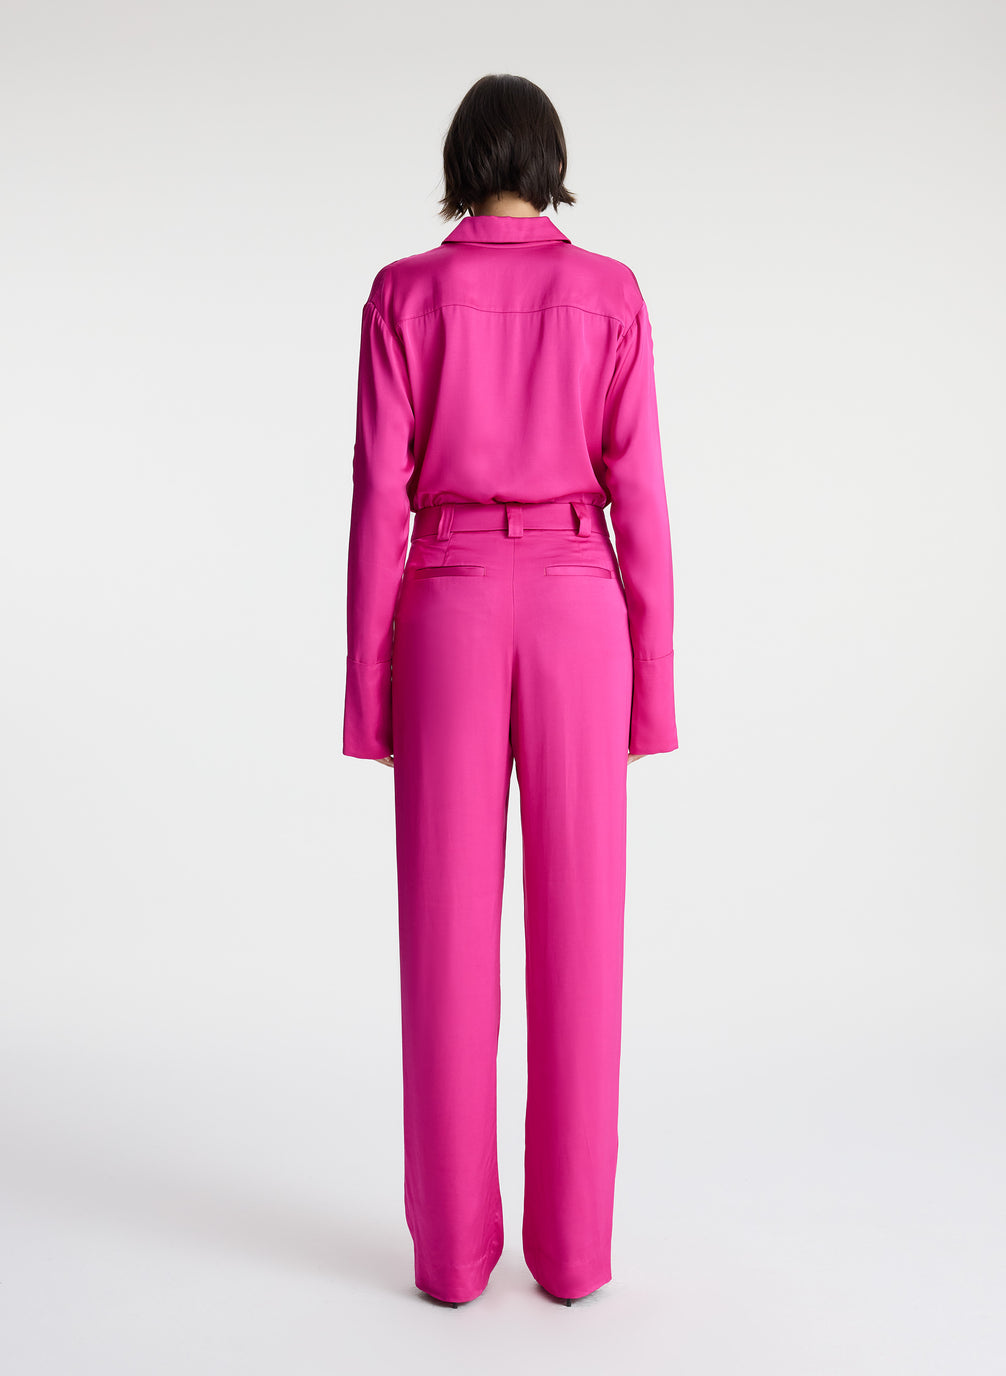 back view of woman wearing bright pink scalloped detailed long sleeve satin shirt and bright pink pants